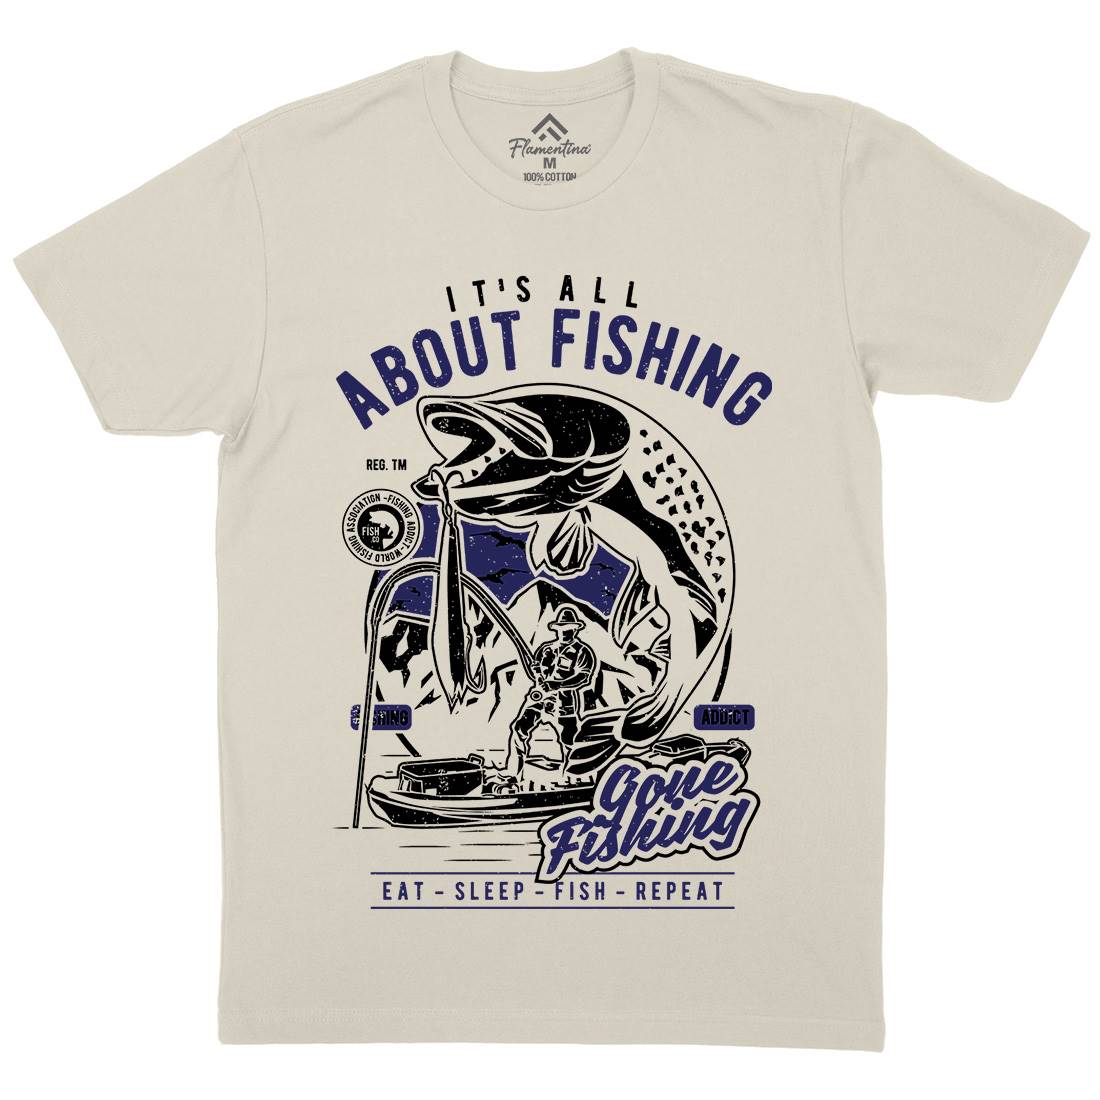 All About Mens Organic Crew Neck T-Shirt Fishing A604